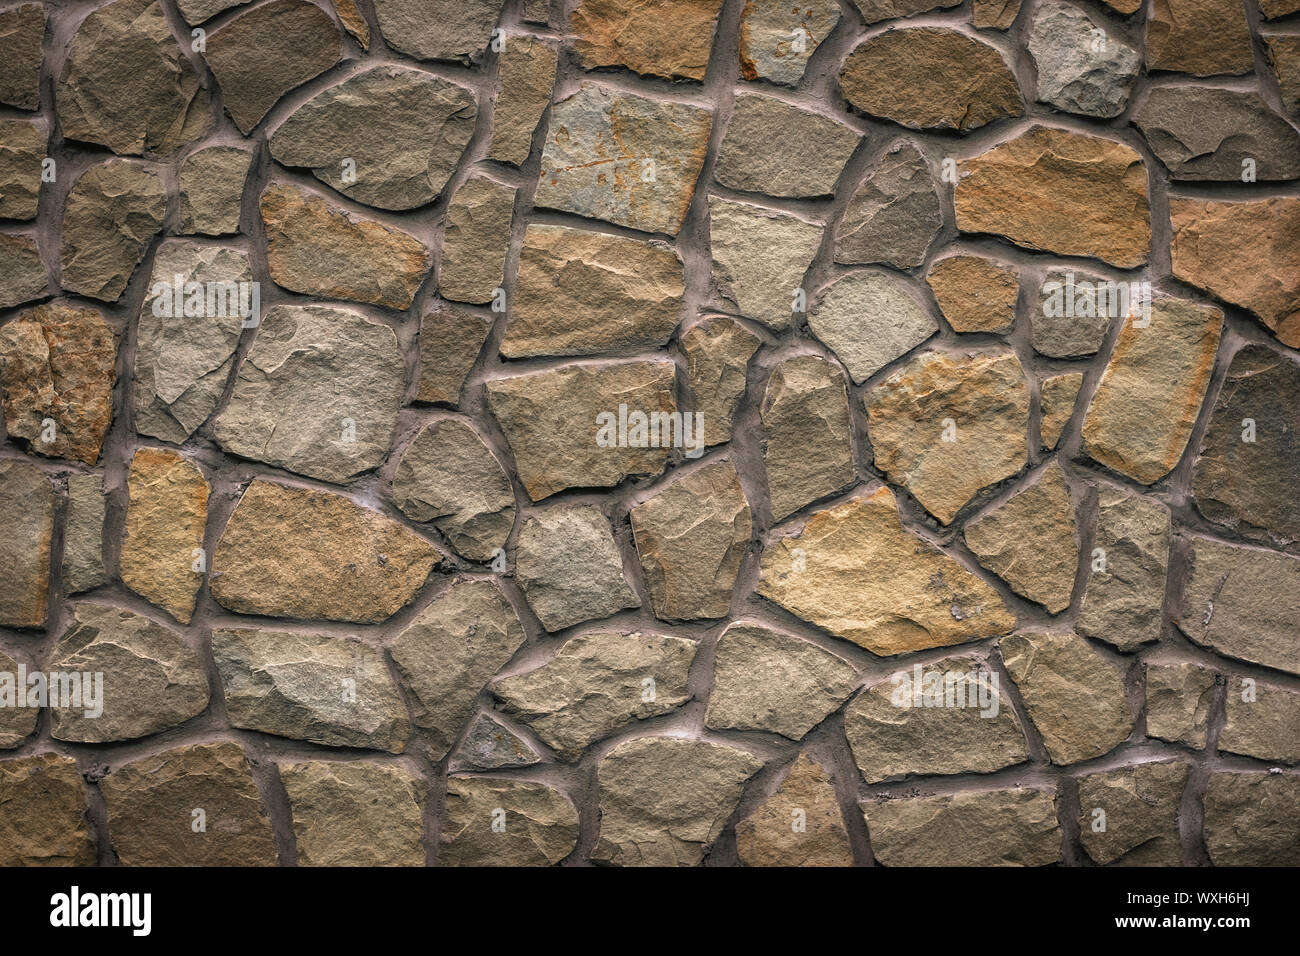 Brown stone texture, retro style. Brick wall background. Abstract rocks pattern. Gray stones, textured surface. Natural backdrop. Marble facade buildi Stock Photo